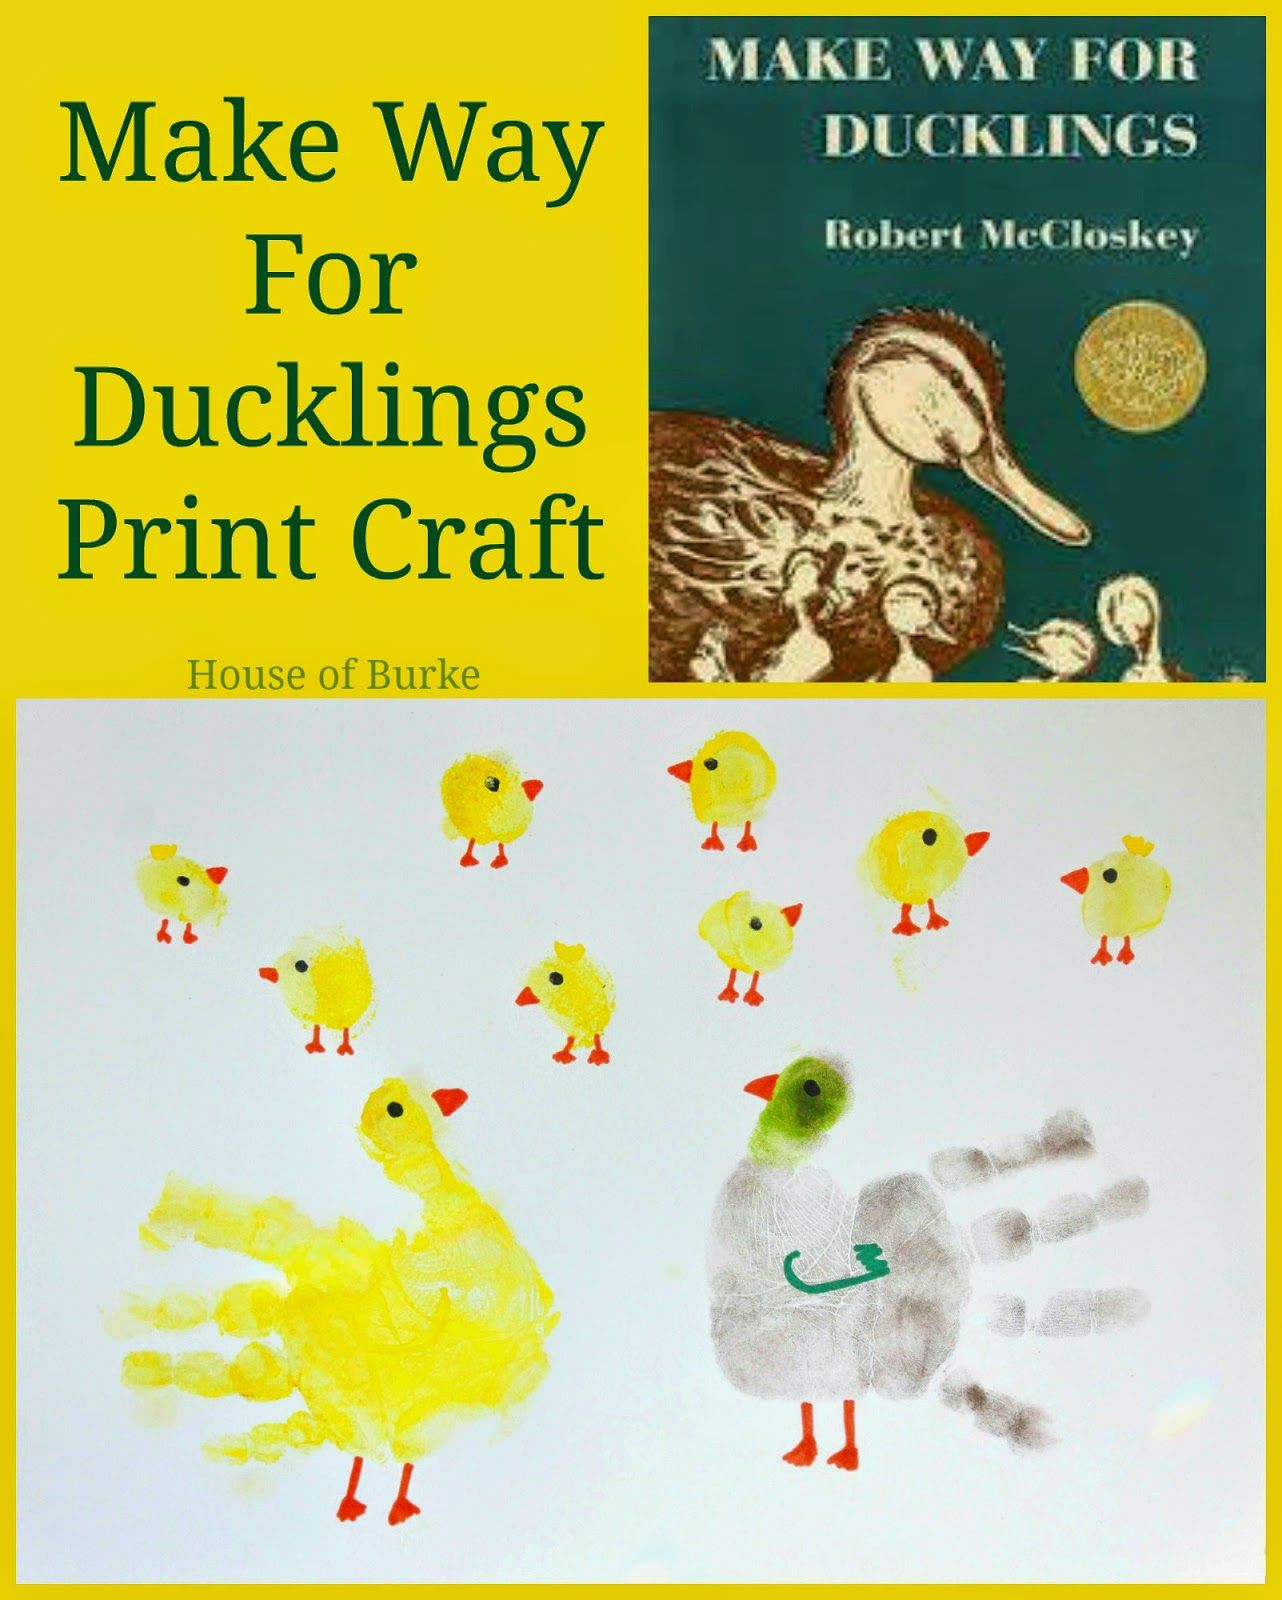 Make Way For Ducklings Print Craft | Make Way For Ducklings